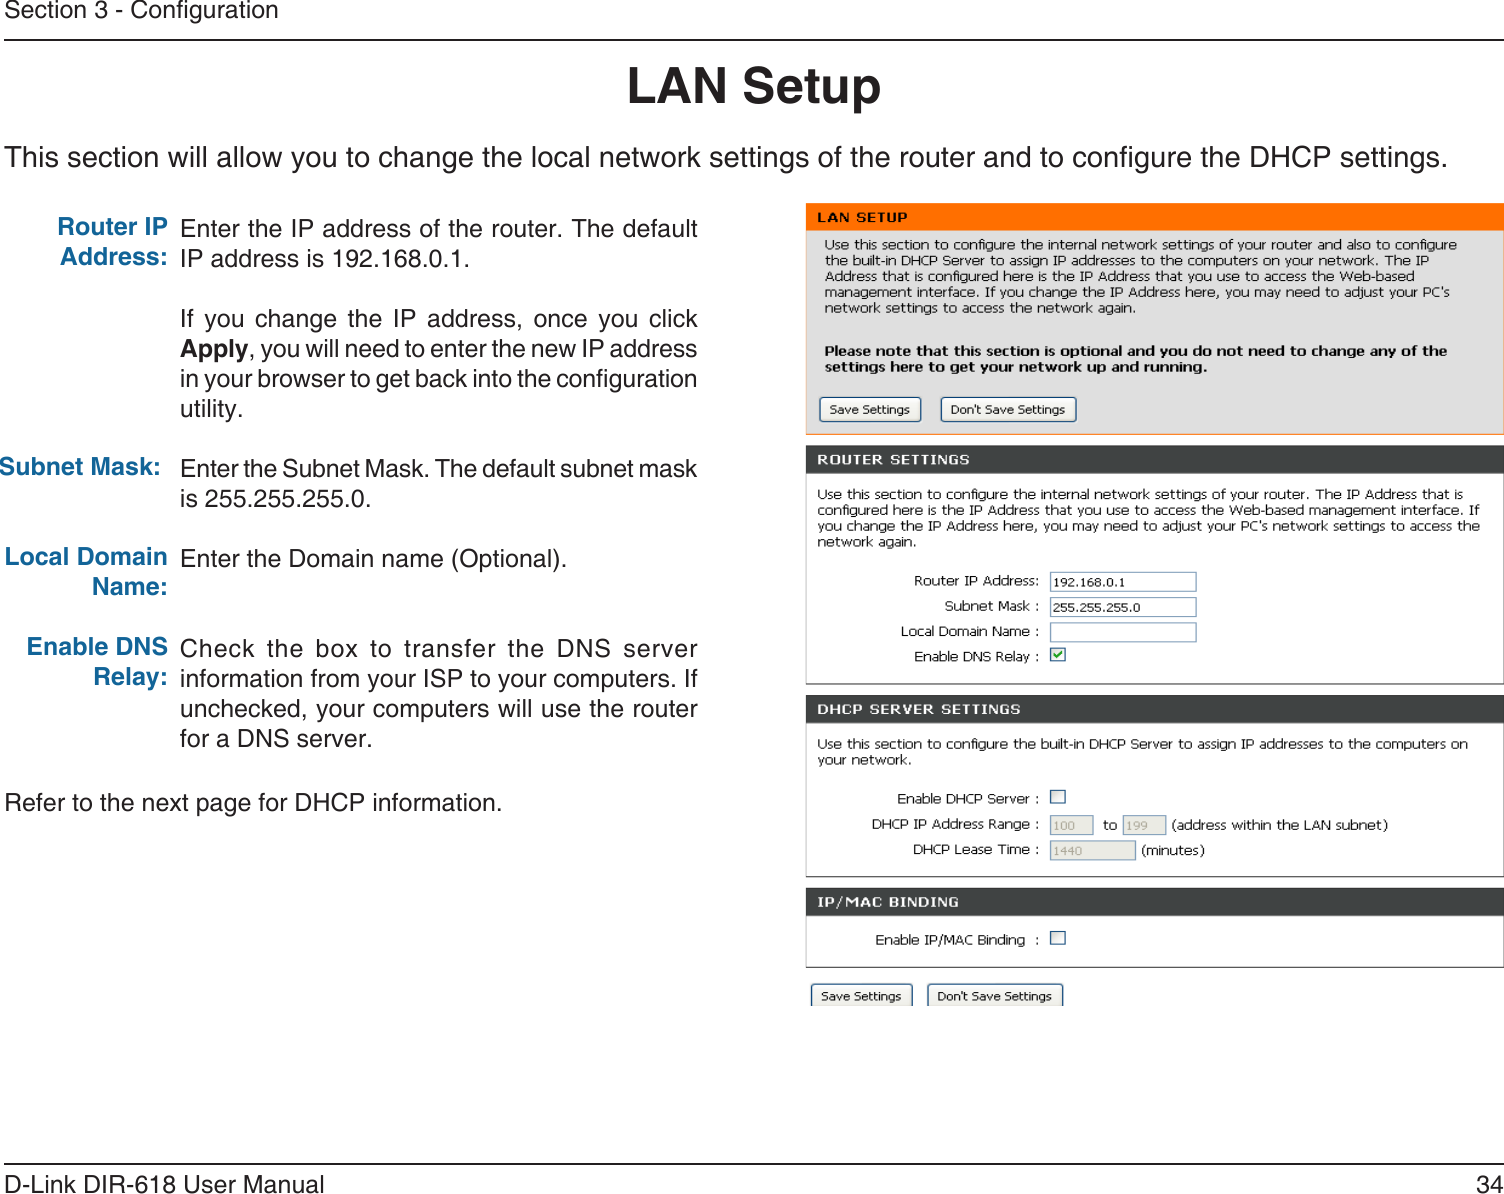 34D-Link DIR-618 User ManualSection 3 - CongurationThis section will allow you to change the local network settings of the router and to congure the DHCP settings.LAN SetupEnter the IP address of the router. The defaultIP address is 192.168.0.1.If you change the IP address, once you click Apply, you will need to enter the new IP address in your browser to get back into the conguration utility.Enter the Subnet Mask. The default subnet maskis 255.255.255.0.Enter the Domain name (Optional).Check the box to transfer the DNS server information from your ISP to your computers. Ifunchecked, your computers will use the router for a DNS server.Router IP Address: Subnet Mask:Local Domain Name:Enable DNS Relay:Refer to the next page for DHCP information.